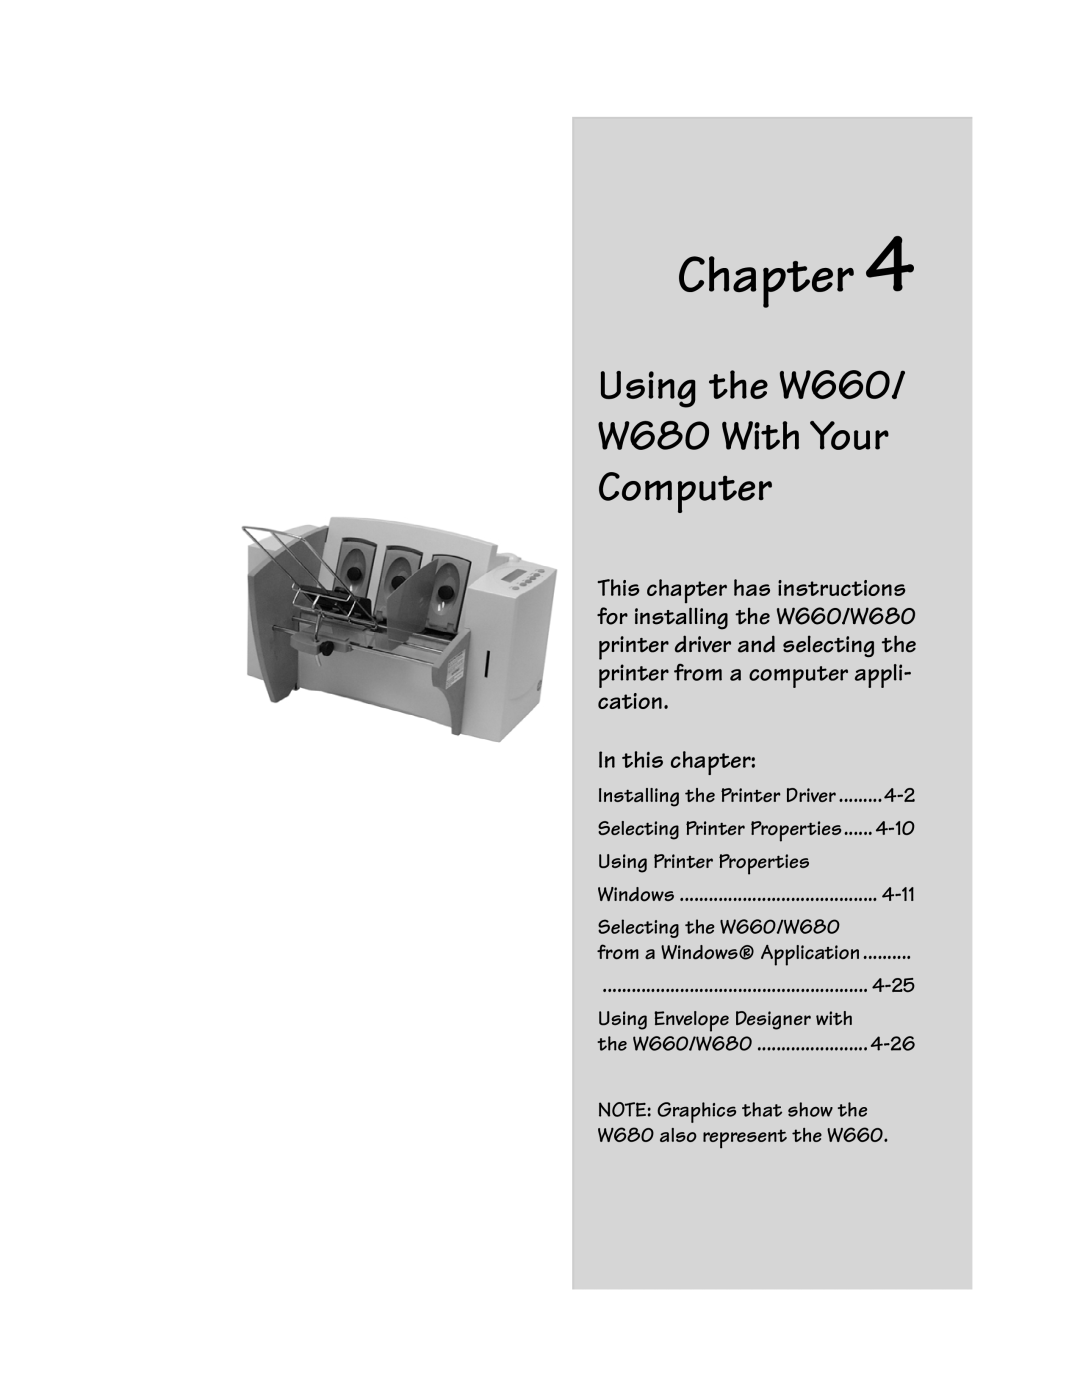 Pitney Bowes Using the W660 W680 With Your Computer, 4-10, Using Printer Properties, 4-11, Selecting the W660/W680 